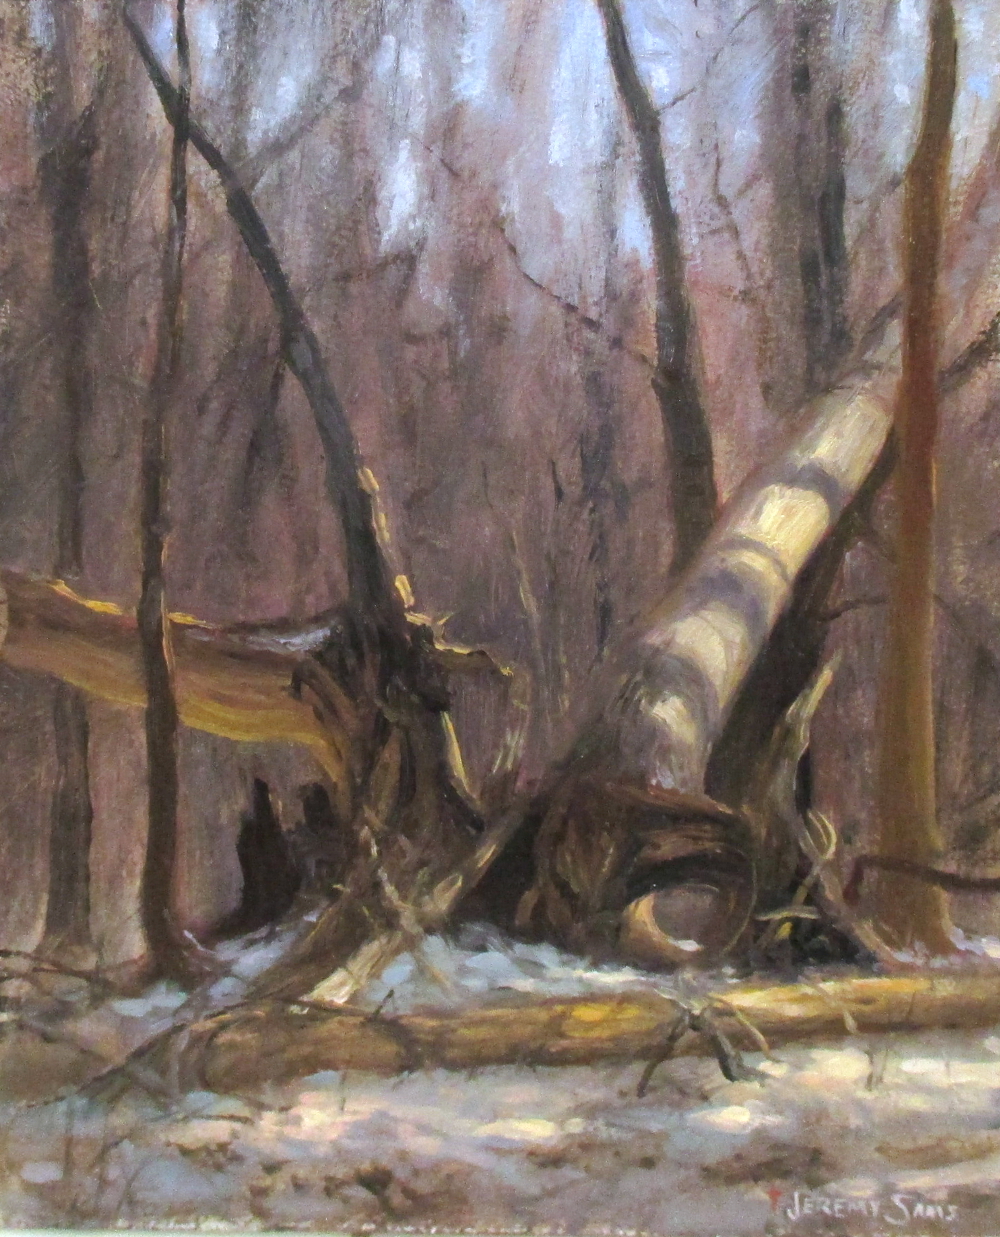 plein air painting of fallen trees in snow by North Carolina artist Jeremy Sams